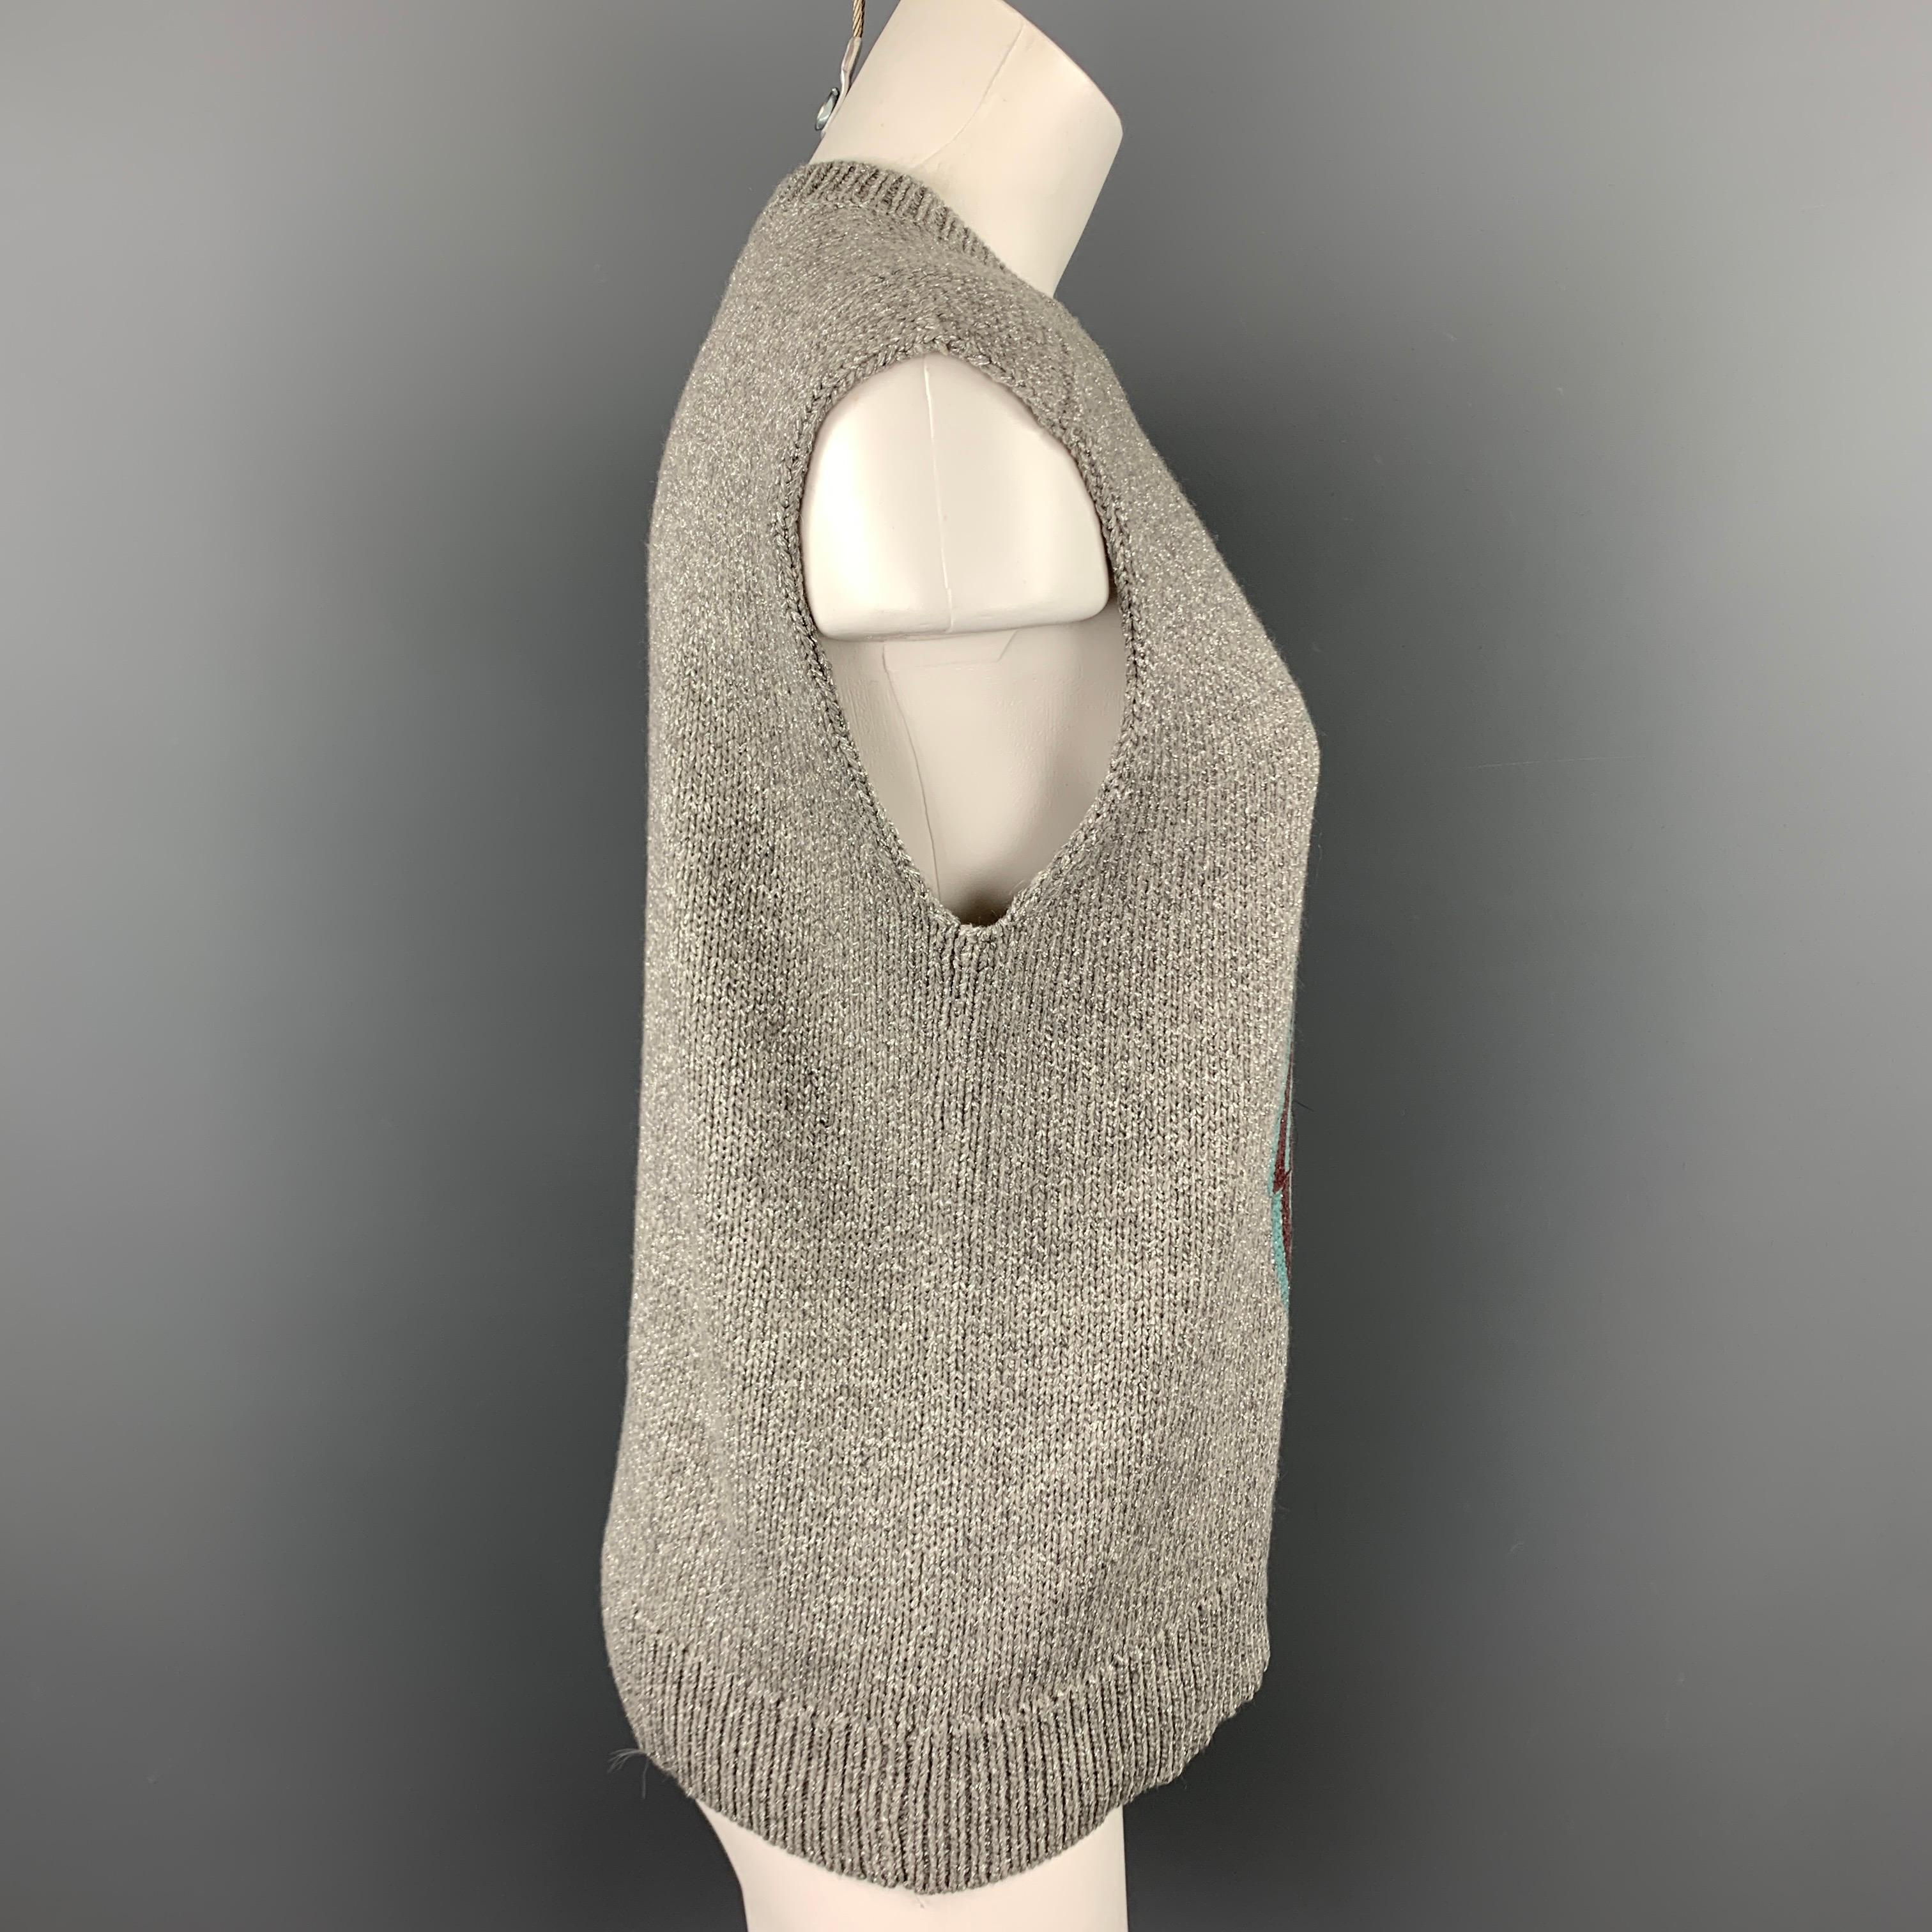 DRIES VAN NOTEN vest comes in a silver knitted geometric wool blend featuring a ribbed crew-neck.

Very Good Pre-Owned Condition.
Marked: S

Measurements:

Shoulder: 16.5 in. 
Bust: 38 in. 
Length: 23 in. 
